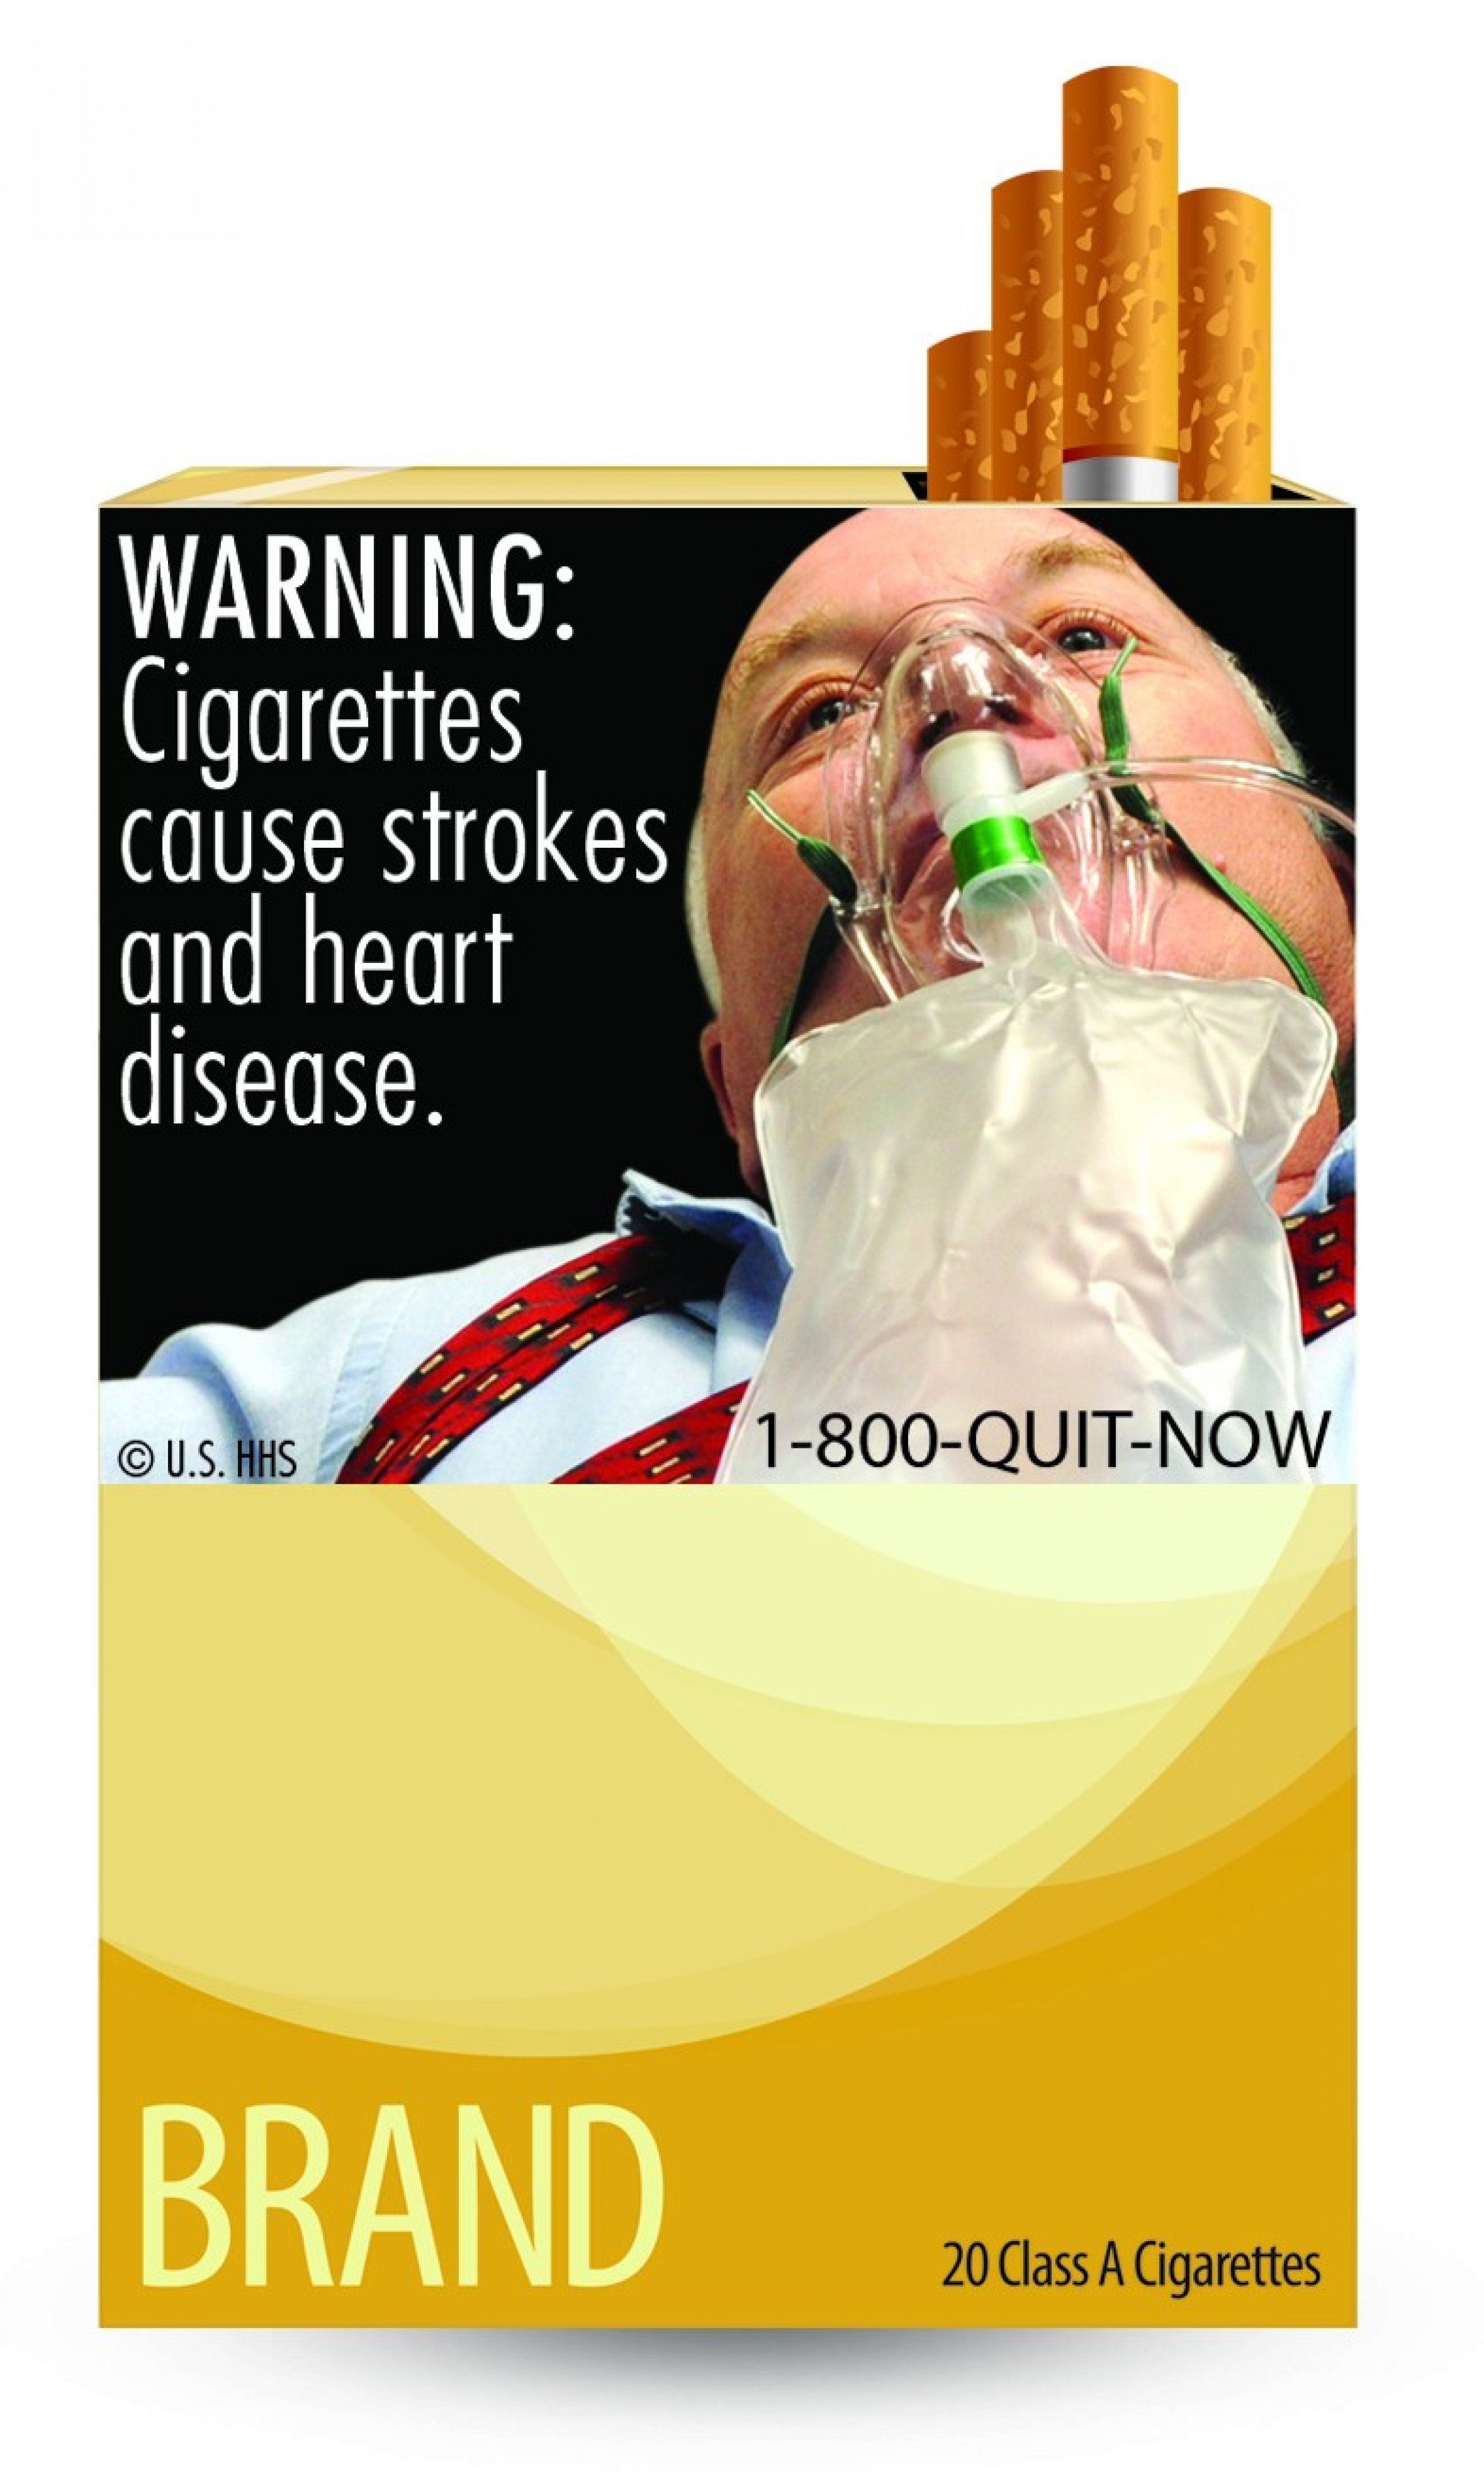 WARNING Cigarettes cause strokes and heart disease.